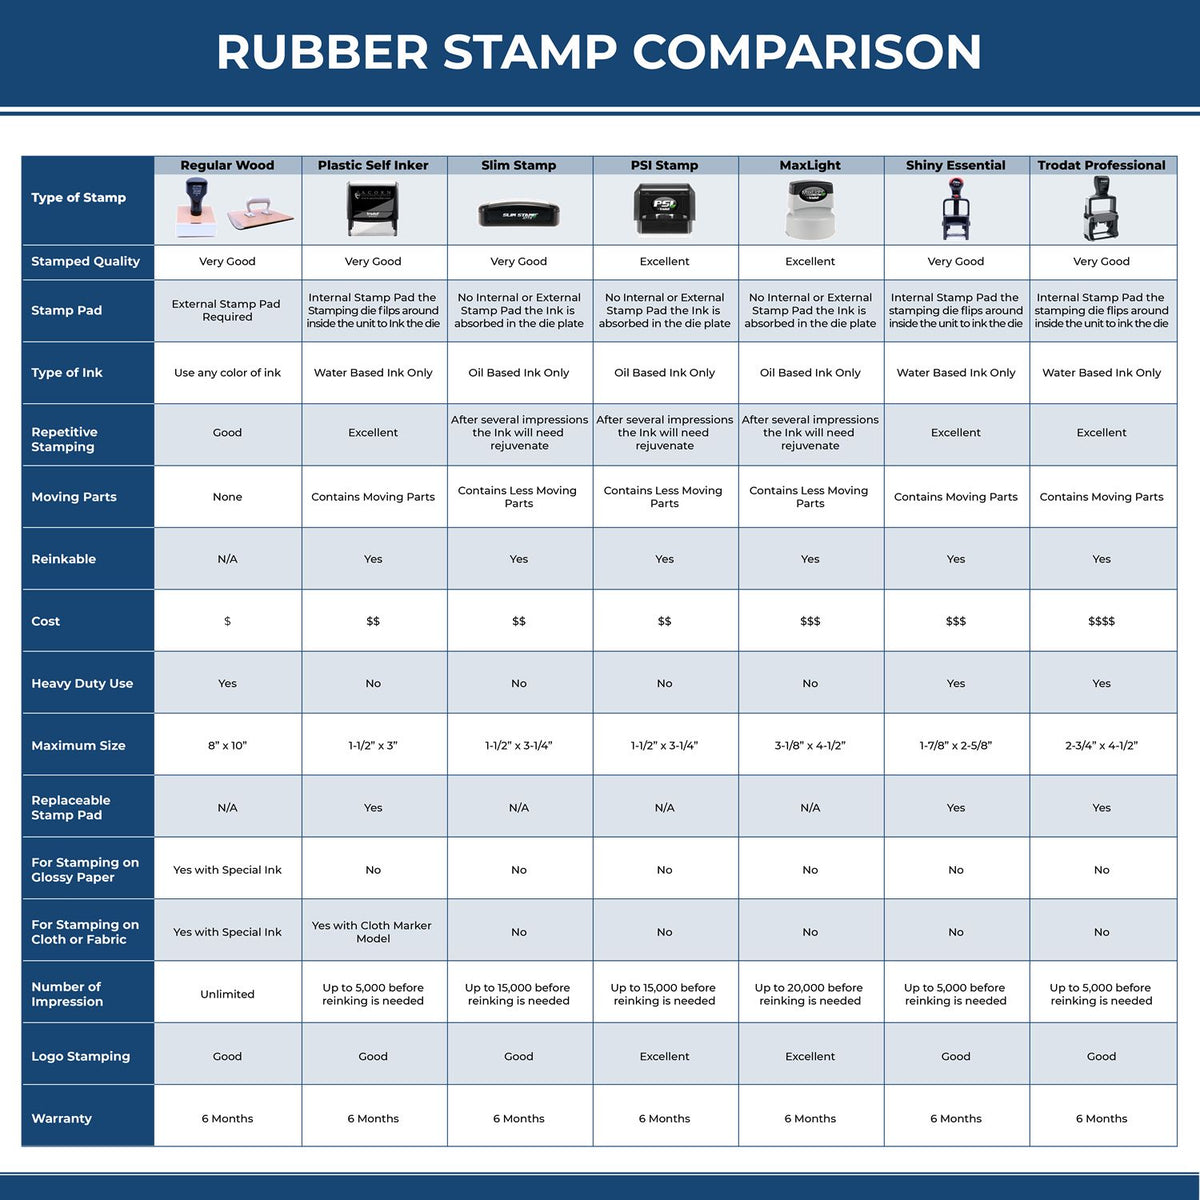 A comparison chart for the different types of mount models available for the Super Slim Washington Notary Public Stamp.